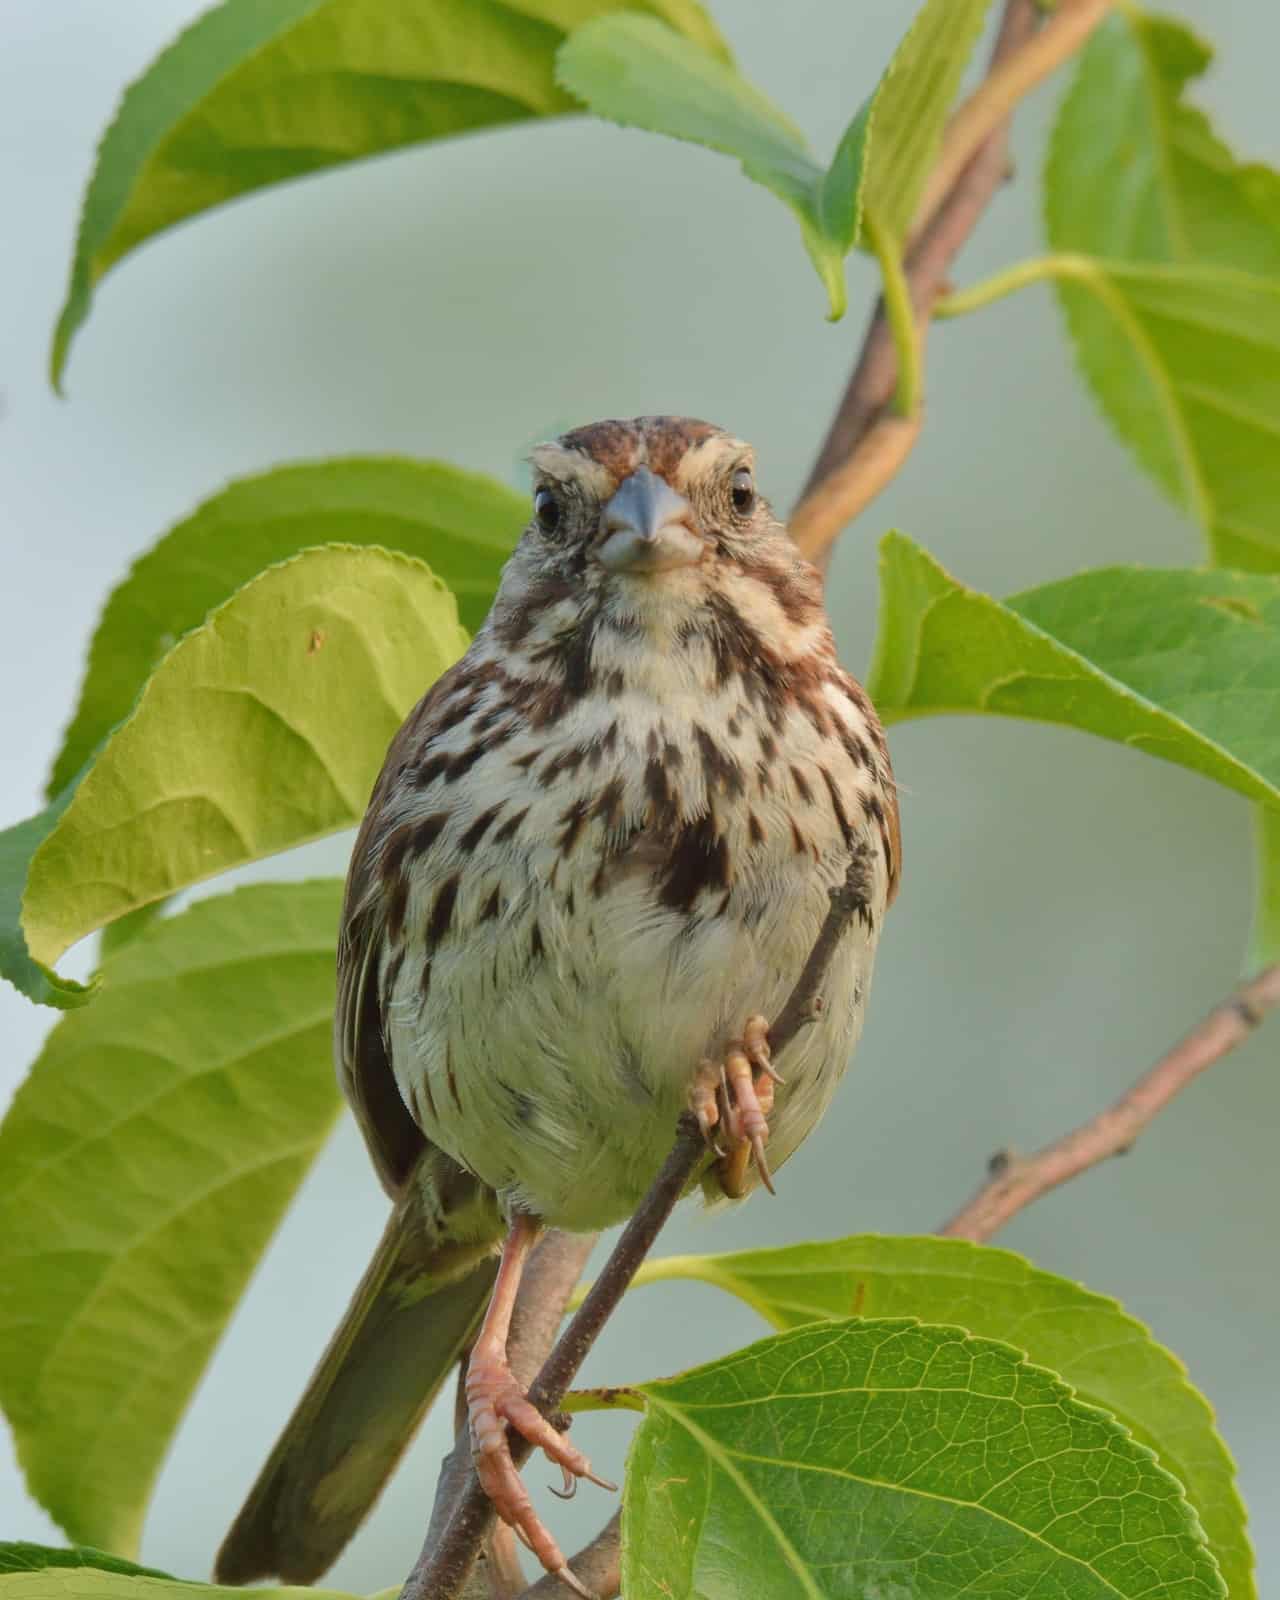 A song sparrow looks into the camera, perching on an early spring branch with green leaves.